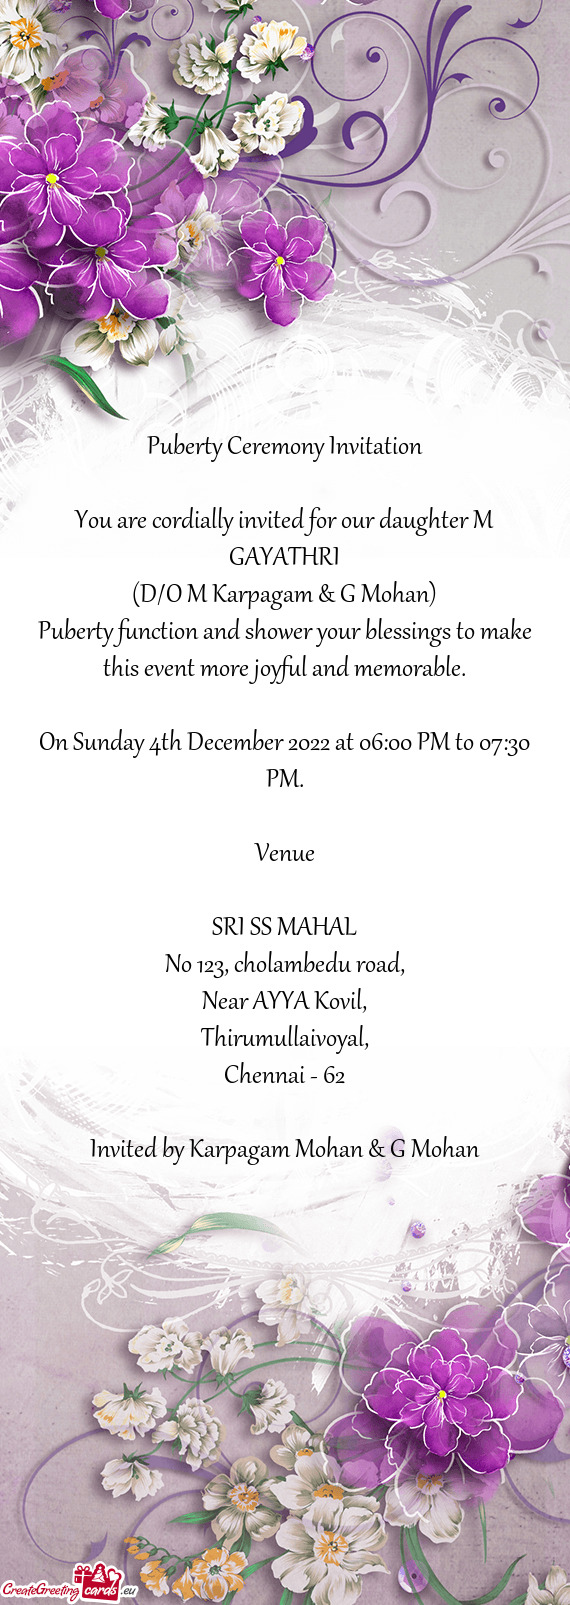 You are cordially invited for our daughter M GAYATHRI